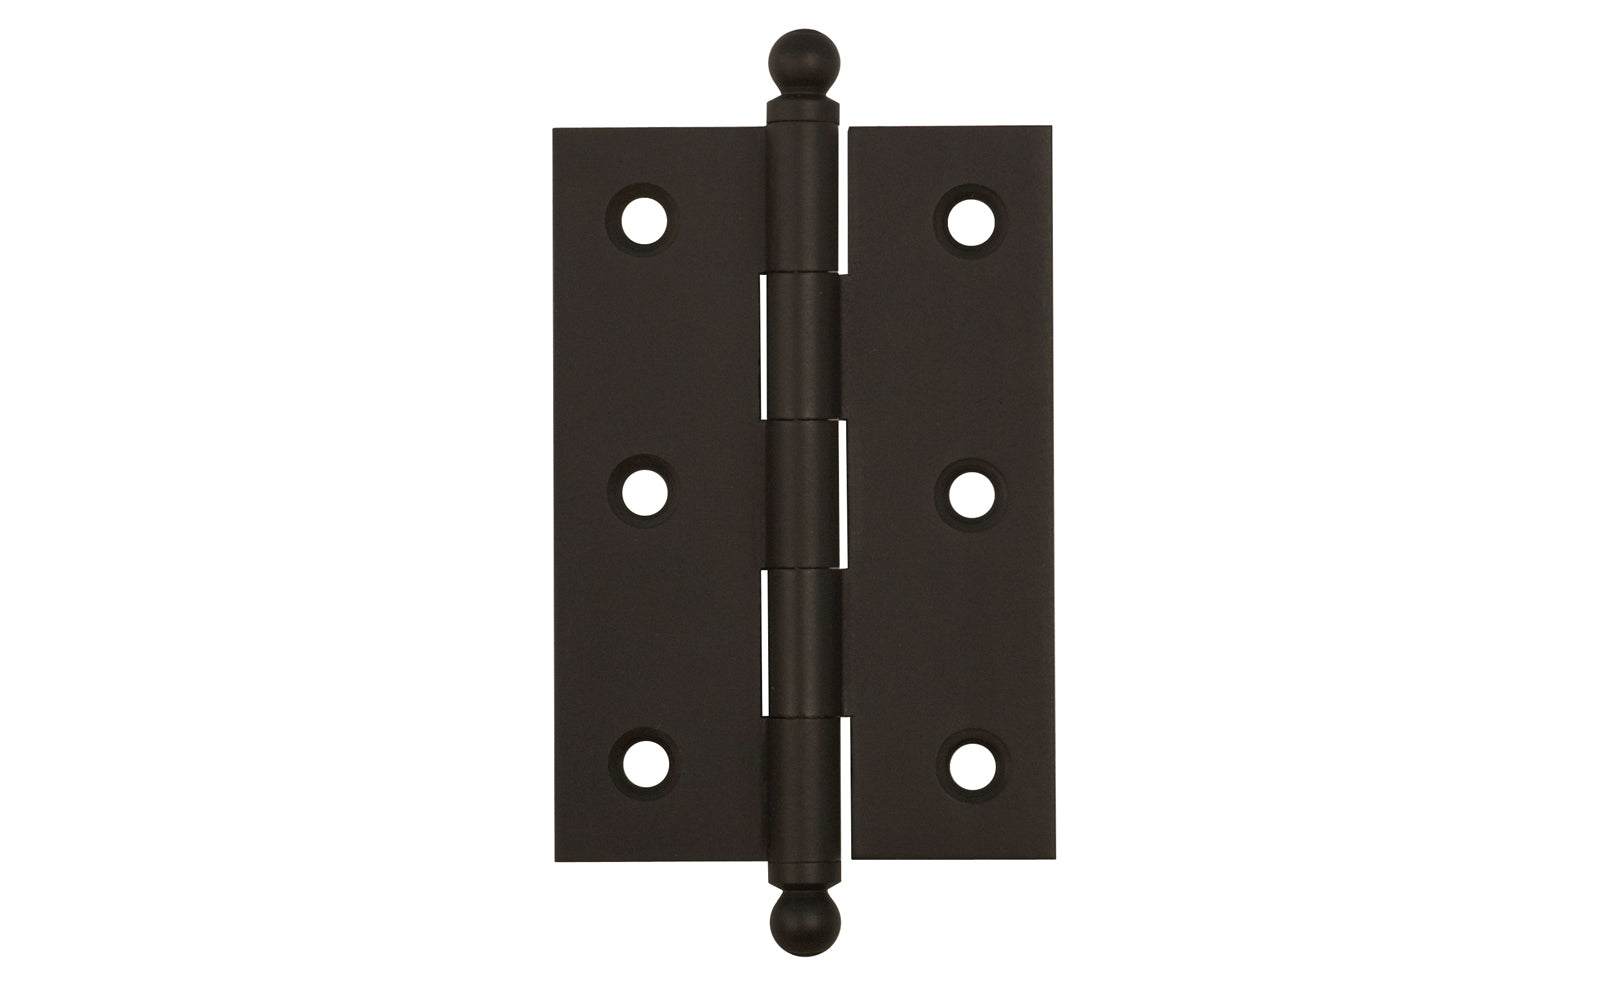 Classic Solid Brass Ball-Tip Cabinet Hinge ~ 2-1/2" x 1-3/4". Full mortise extruded hinges. 3/32" heavy duty leaf thickness gauge. Non-removable fixed hinge pin with ball tips. High quality thick cabinet hinge with ball tips. Oil Rubbed Bronze finish.